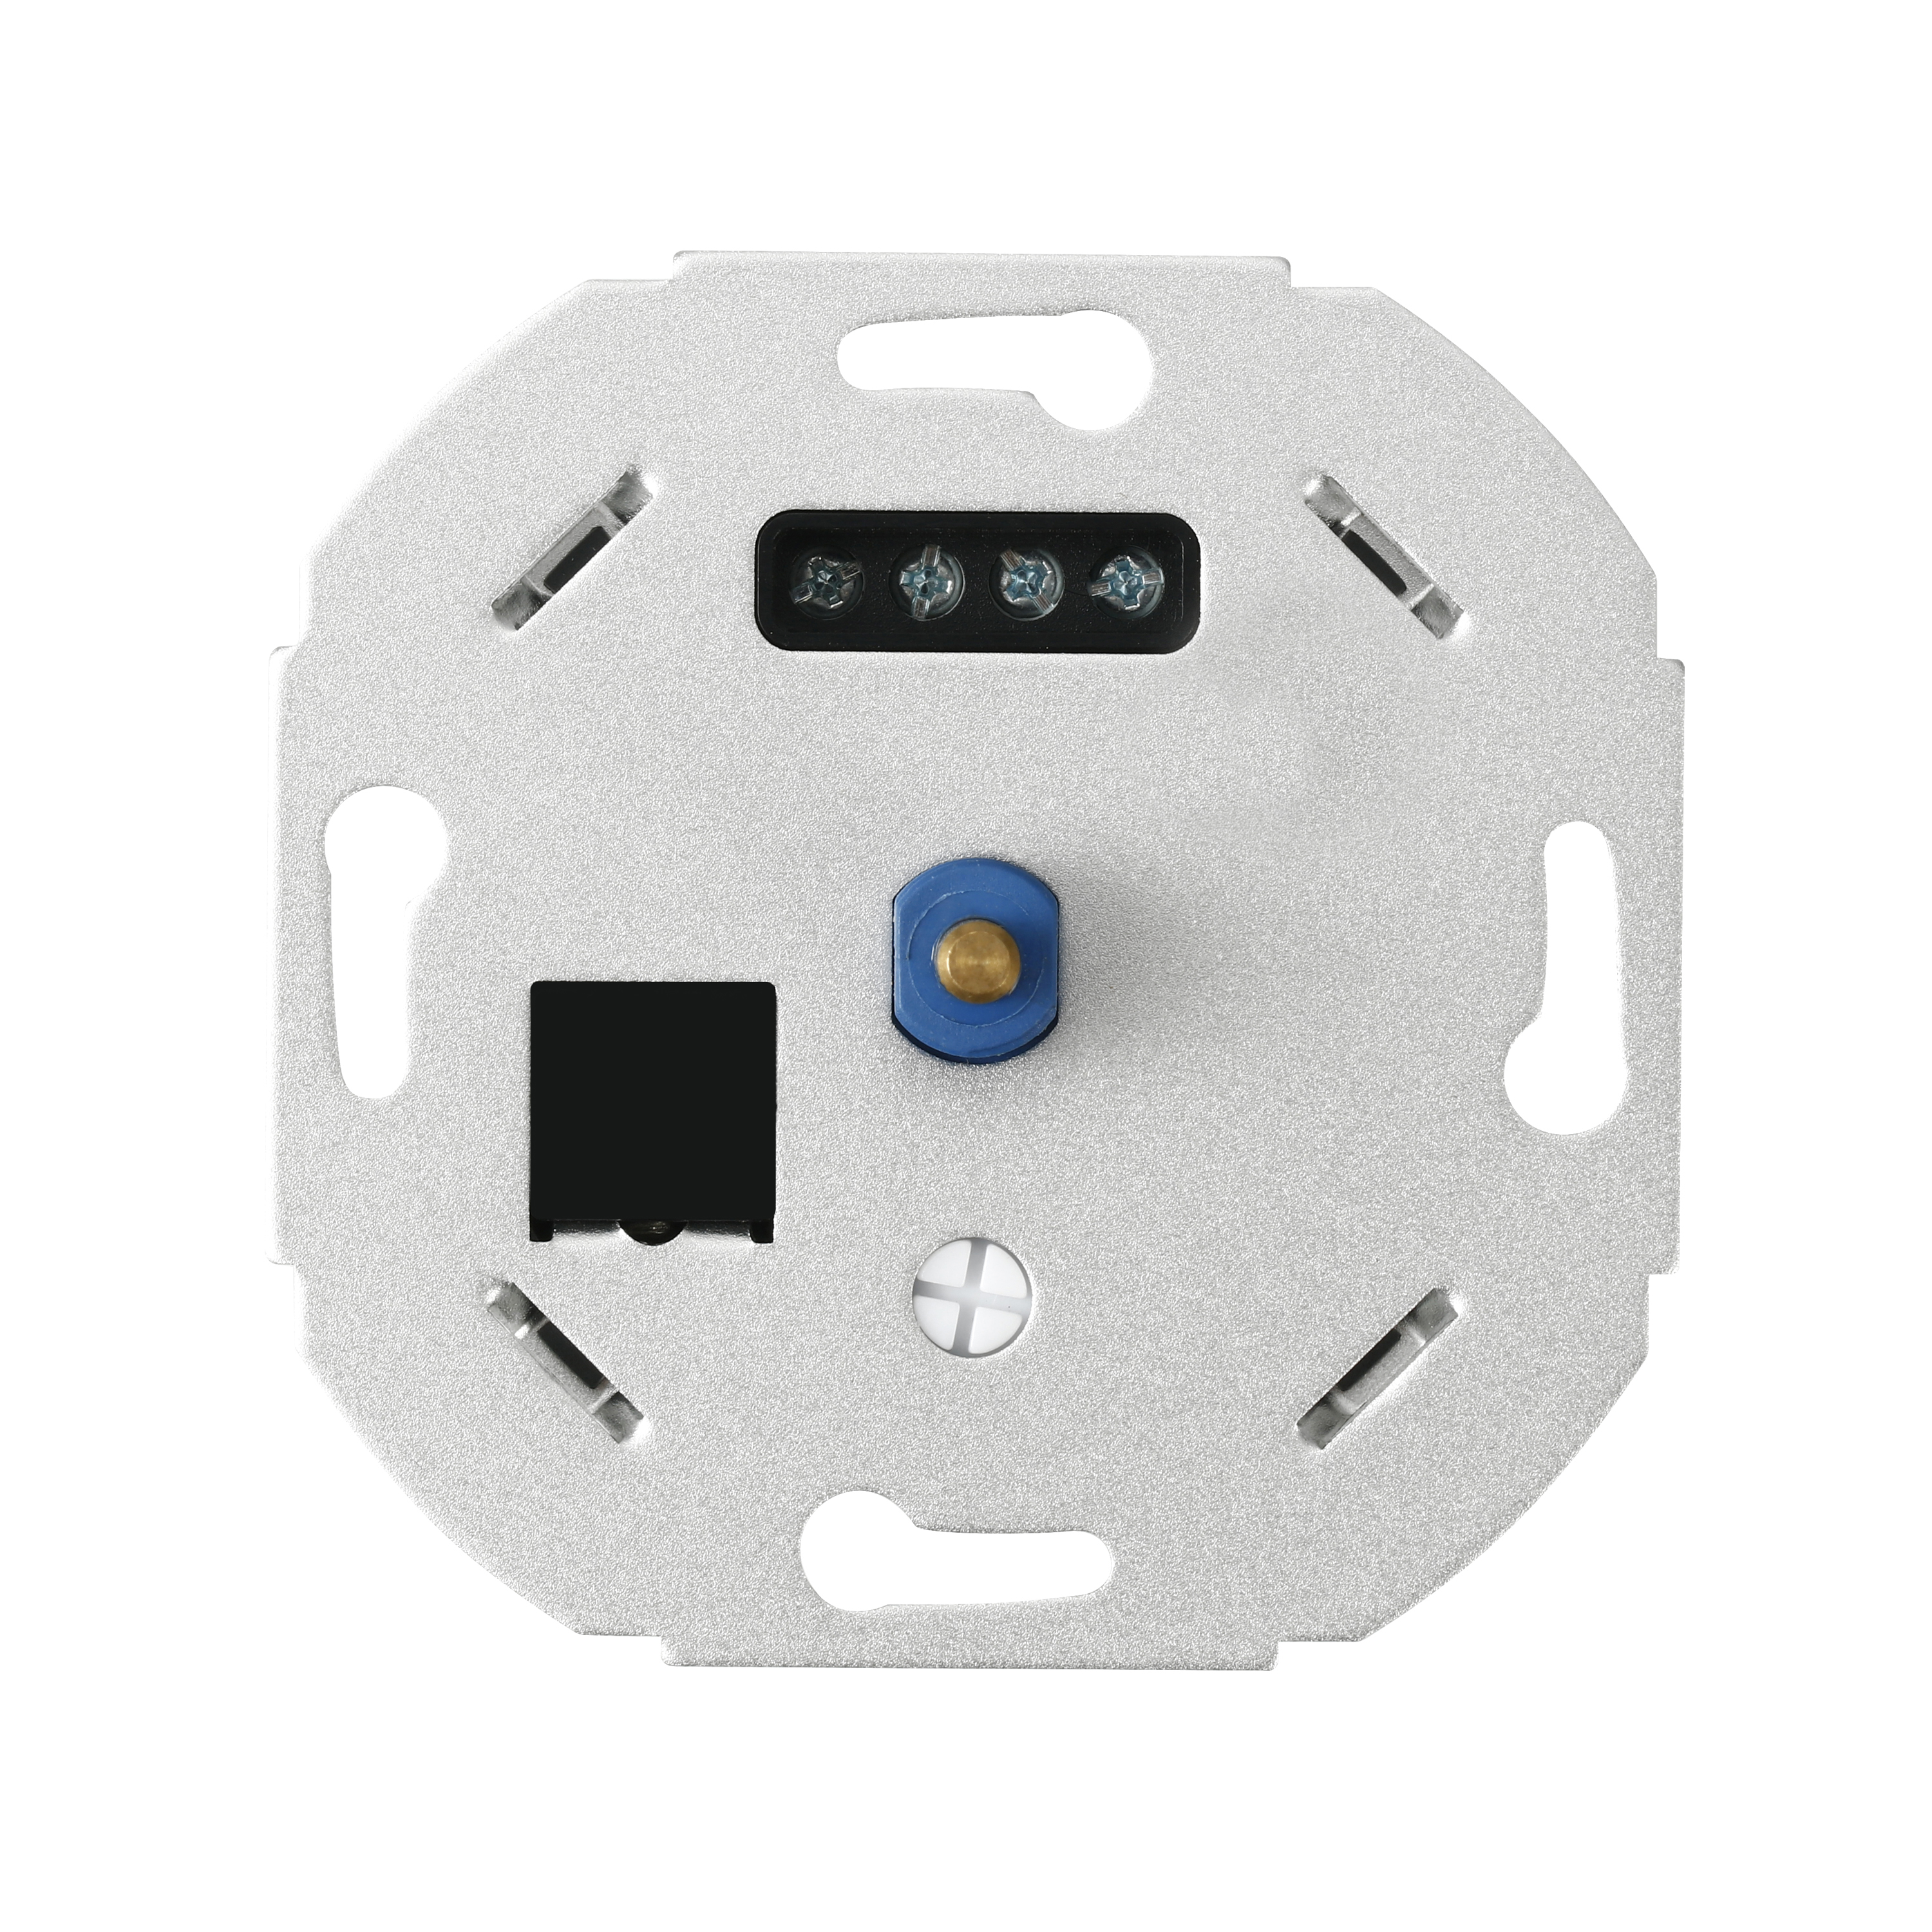 Rotary Wall Dimmer suitable for 200-240V up to 250W